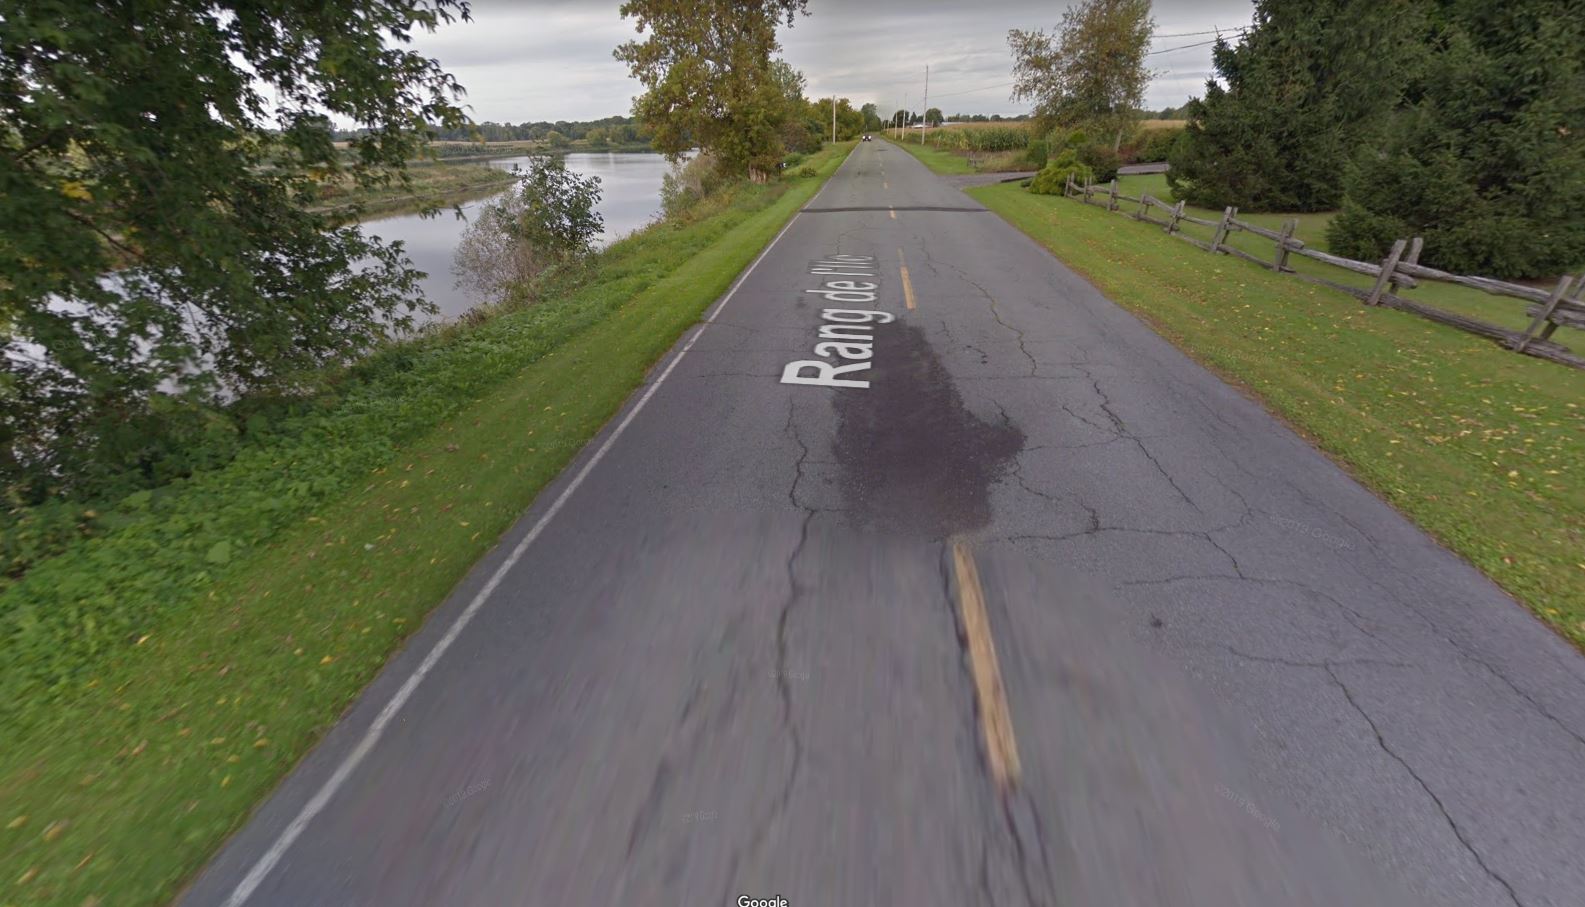 Google Street View imagery from 2014 showing the site of the 1 November 2022 landslide at Pierreville, Canada. 